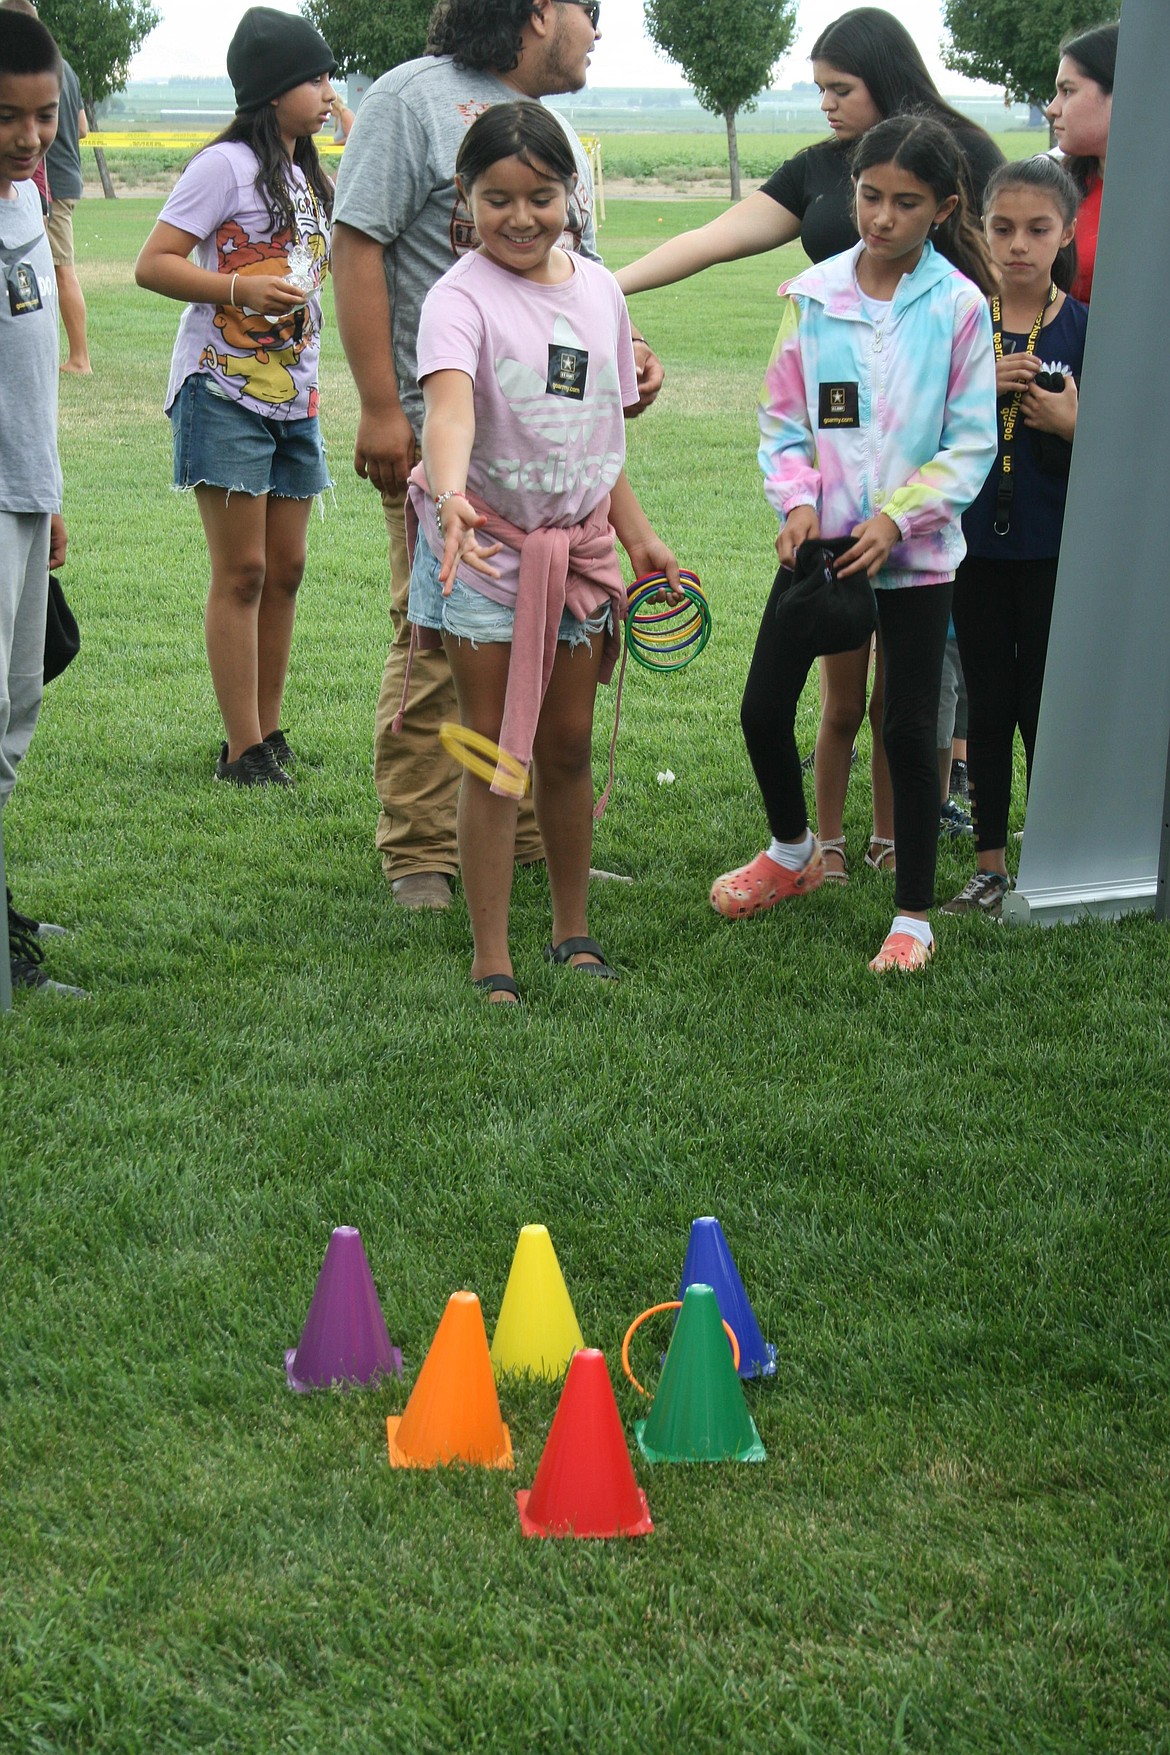 Sophie Santacruz (pink shirt) tries the ring toss game at National Night Out in Quincy.